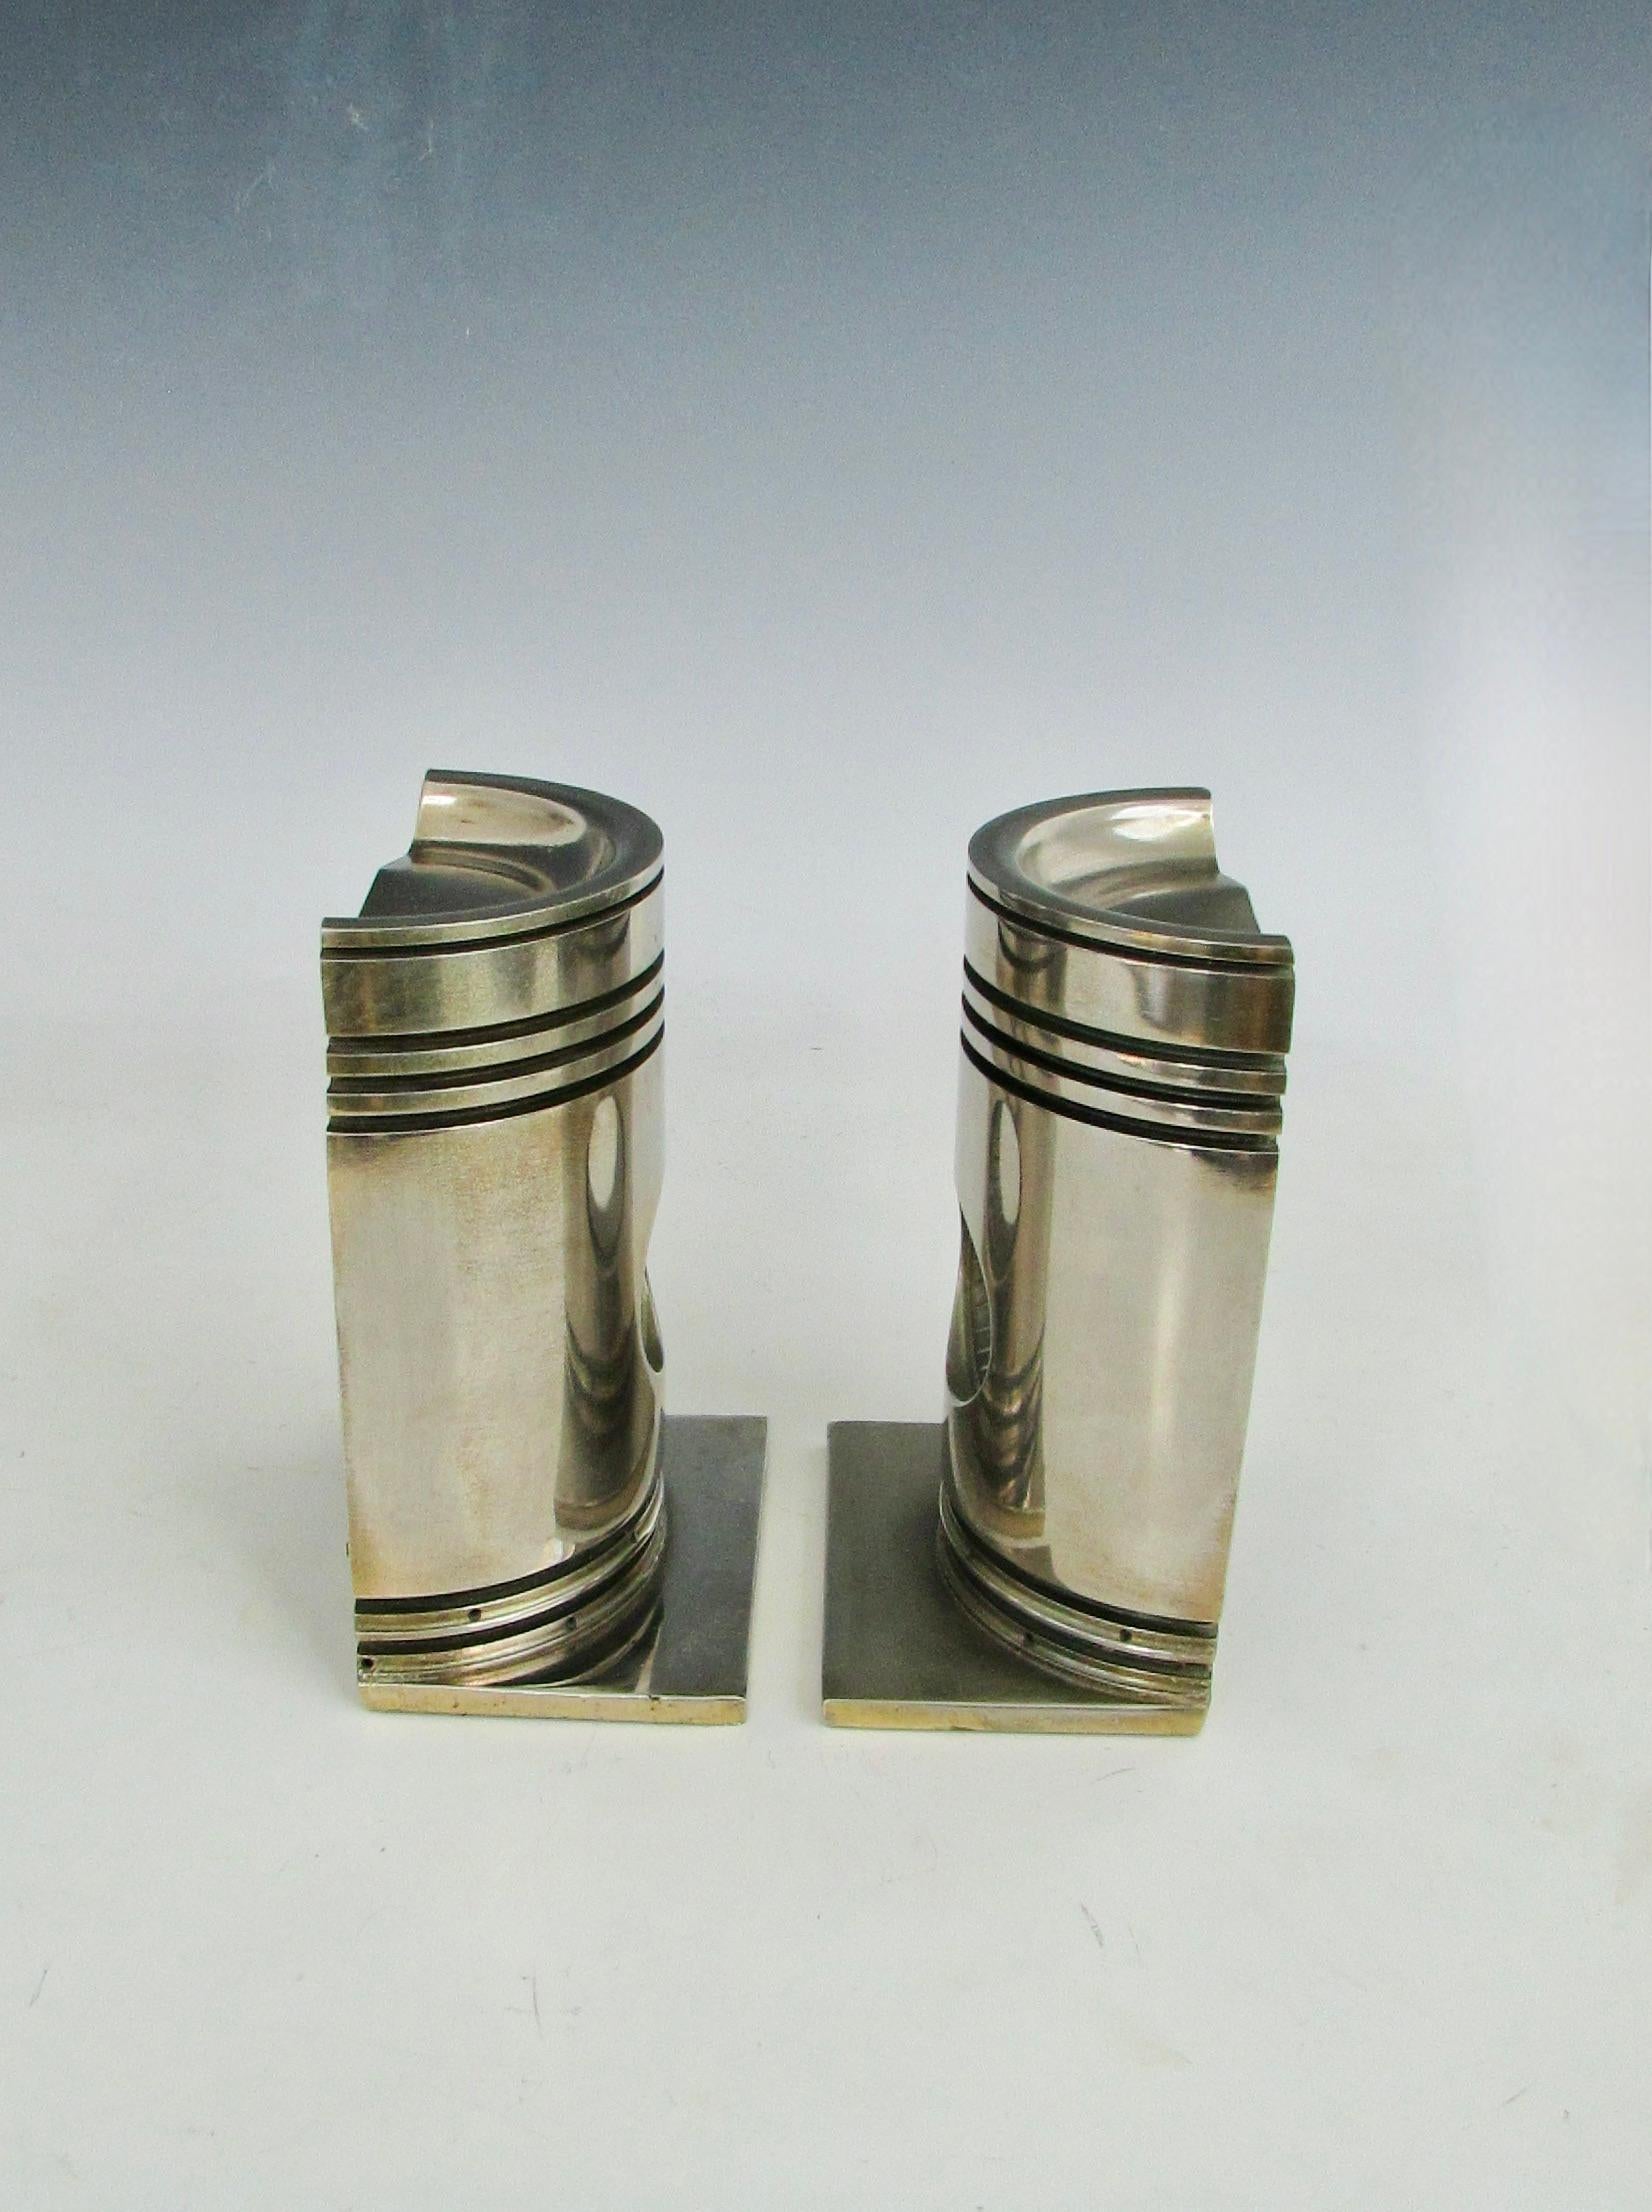 Machine Age Industrial Nickel Plated Piston Bookends 1